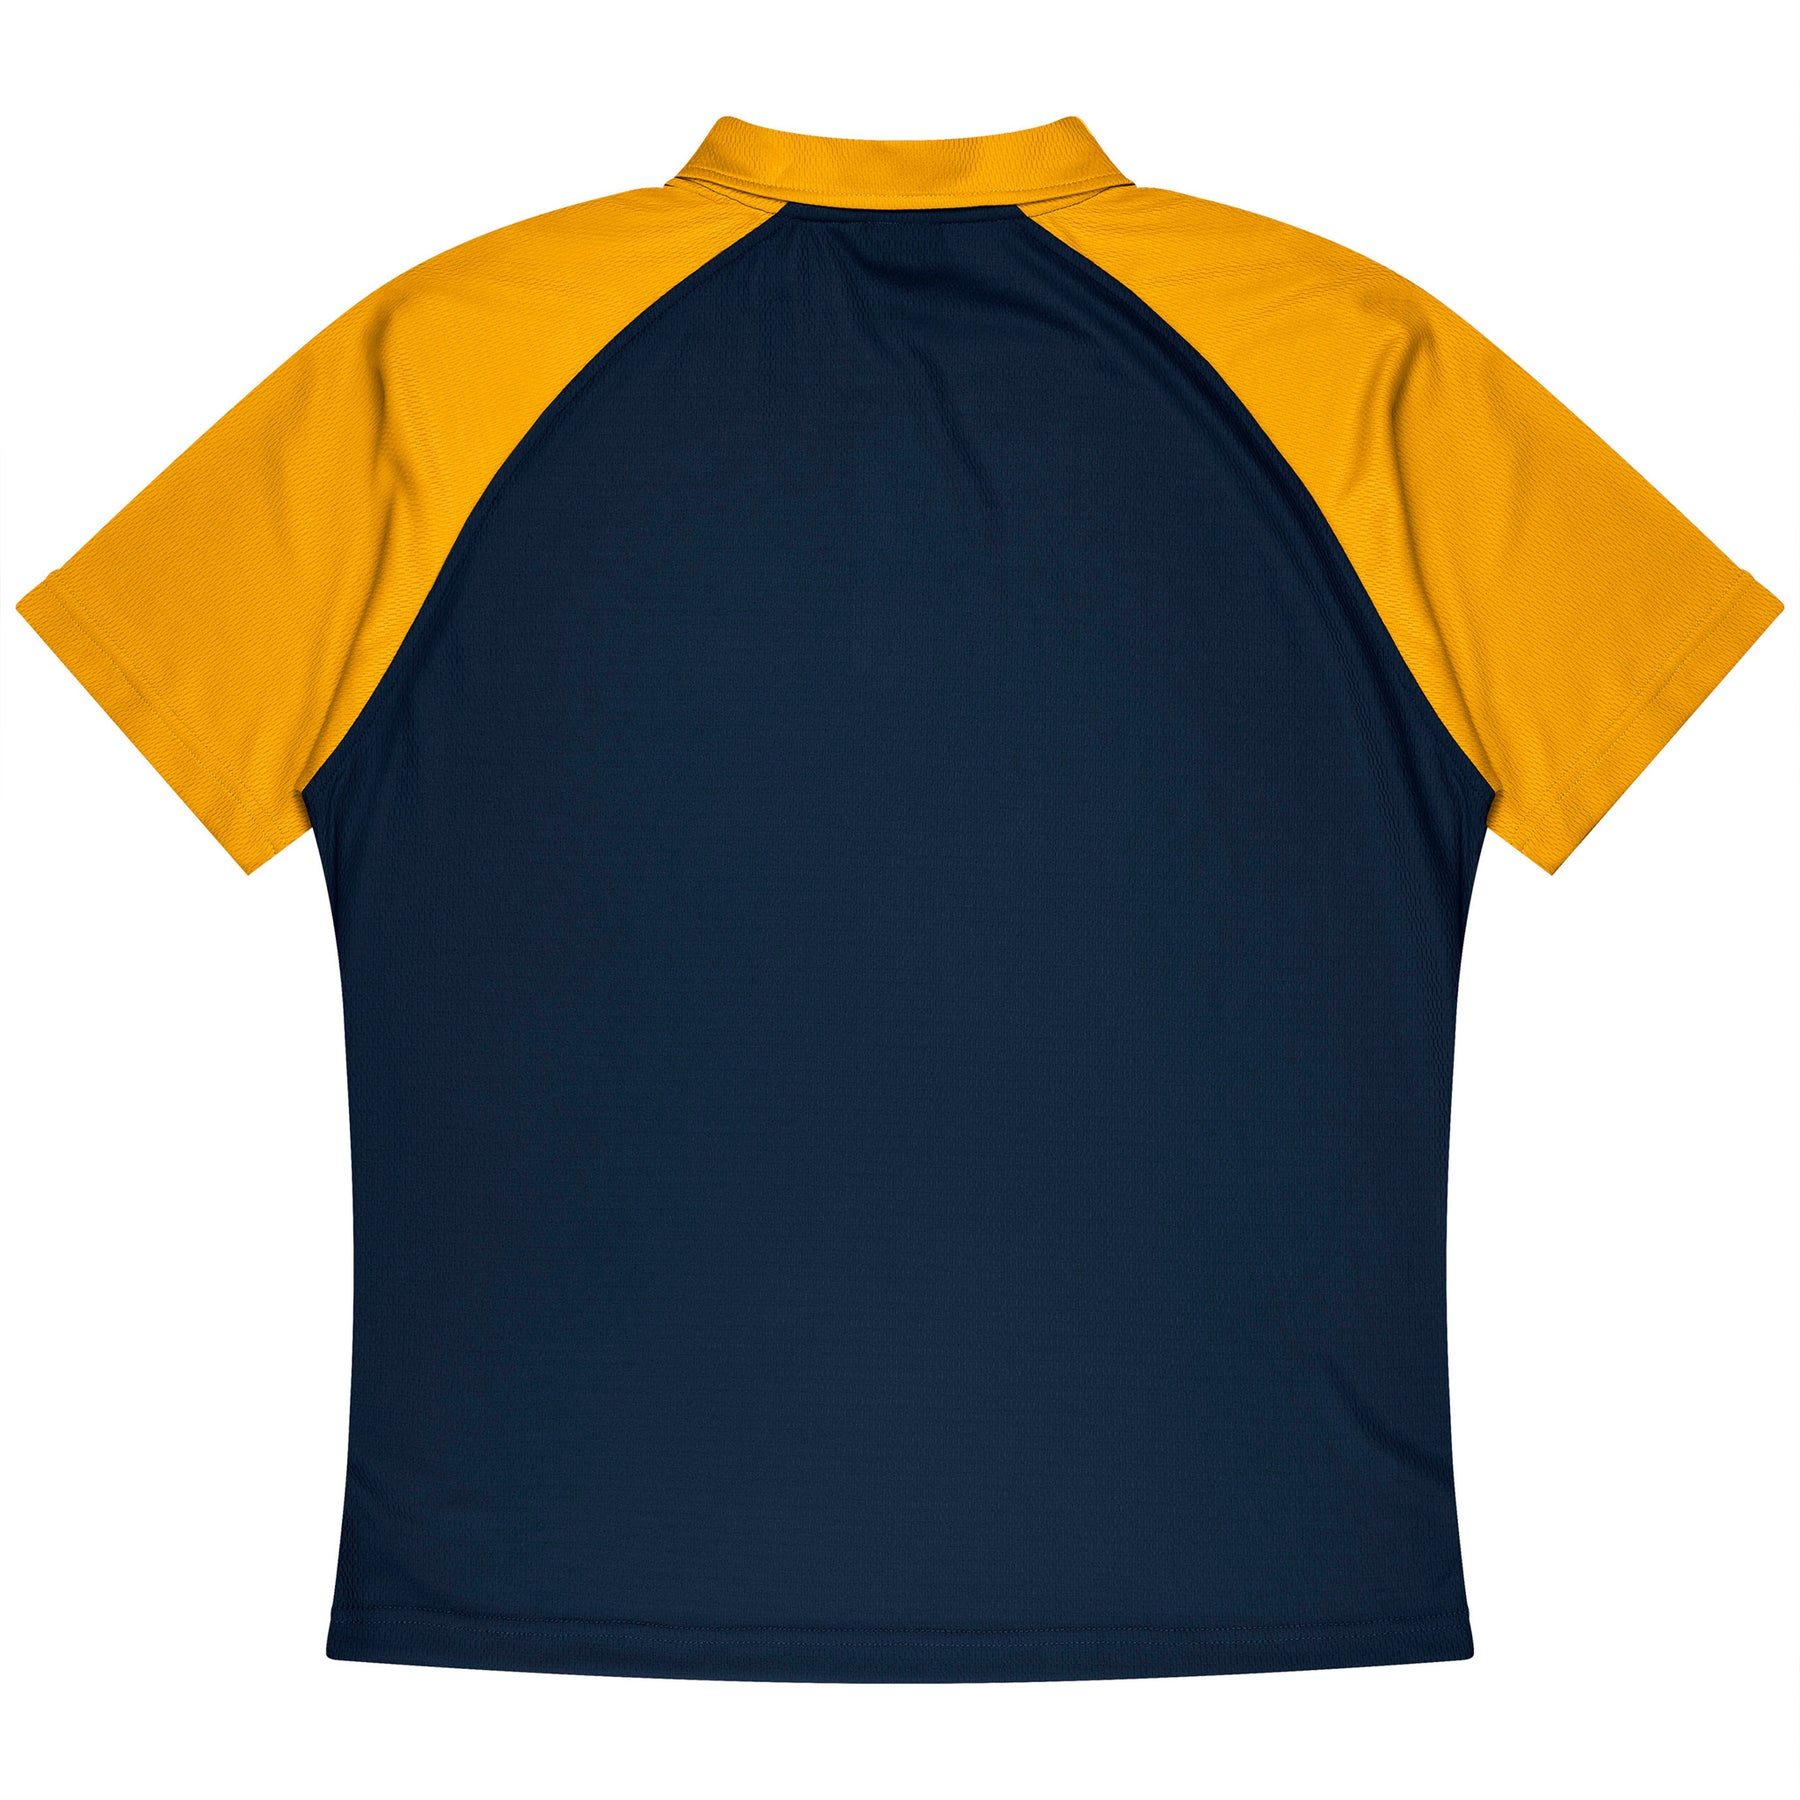 aussie pacific manly mens polo in navy gold